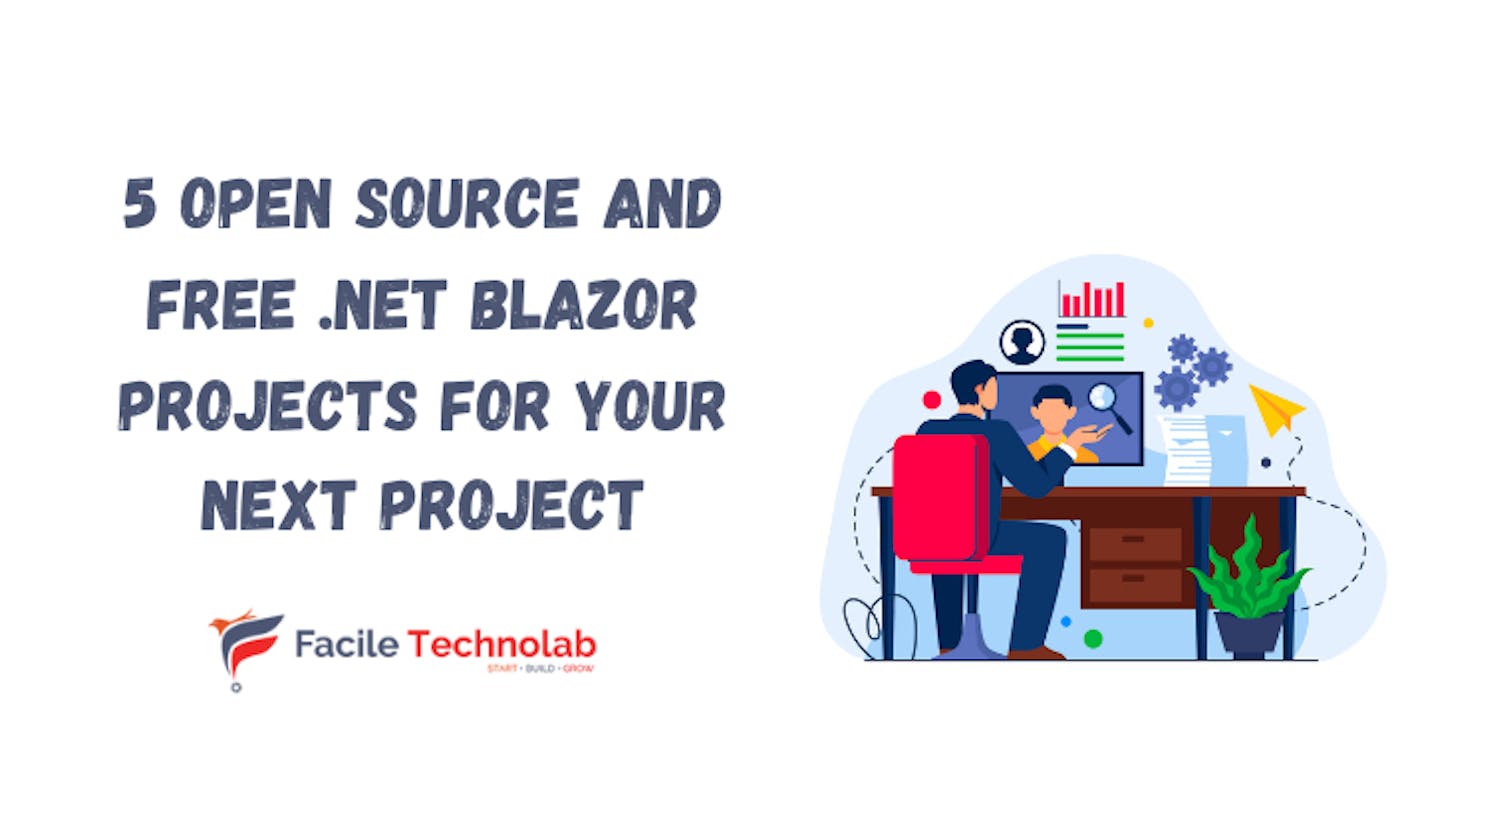 5 Open source and free .net blazor projects for your next project